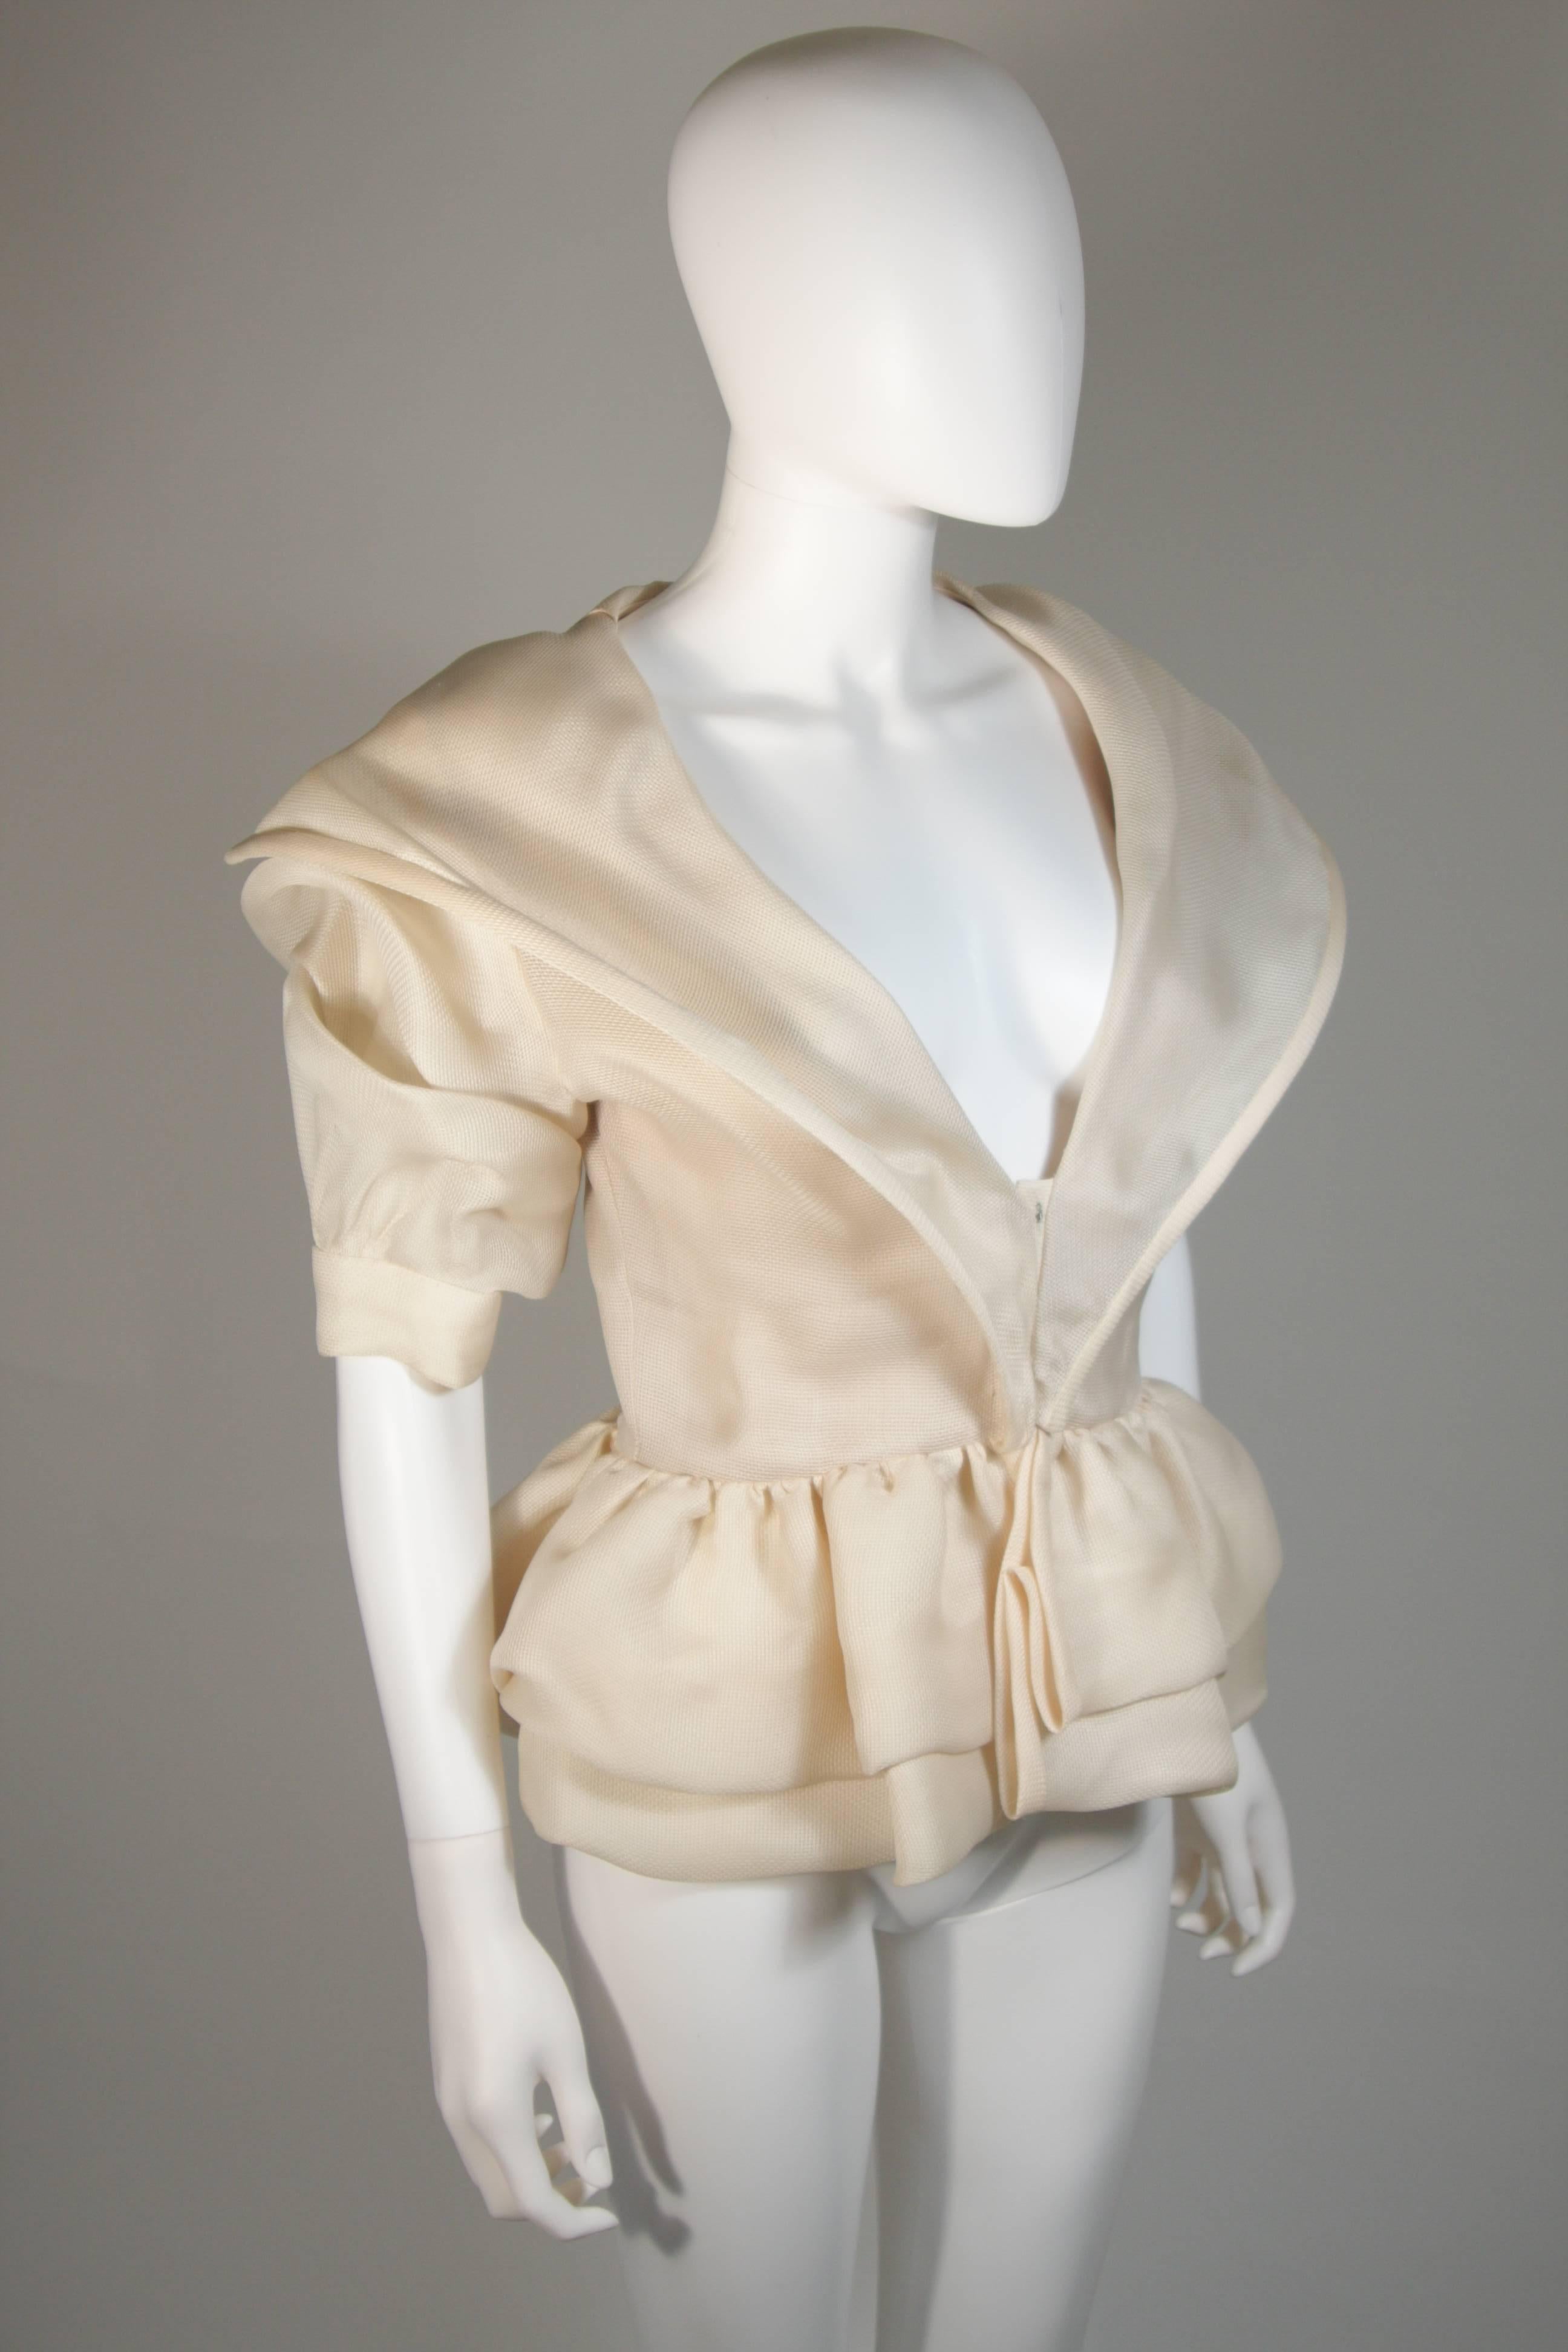 Beige PAUL LOUIS ORRIER Paris Ruffled Ivory Cream Jacket with Structured Hem Size 40 For Sale